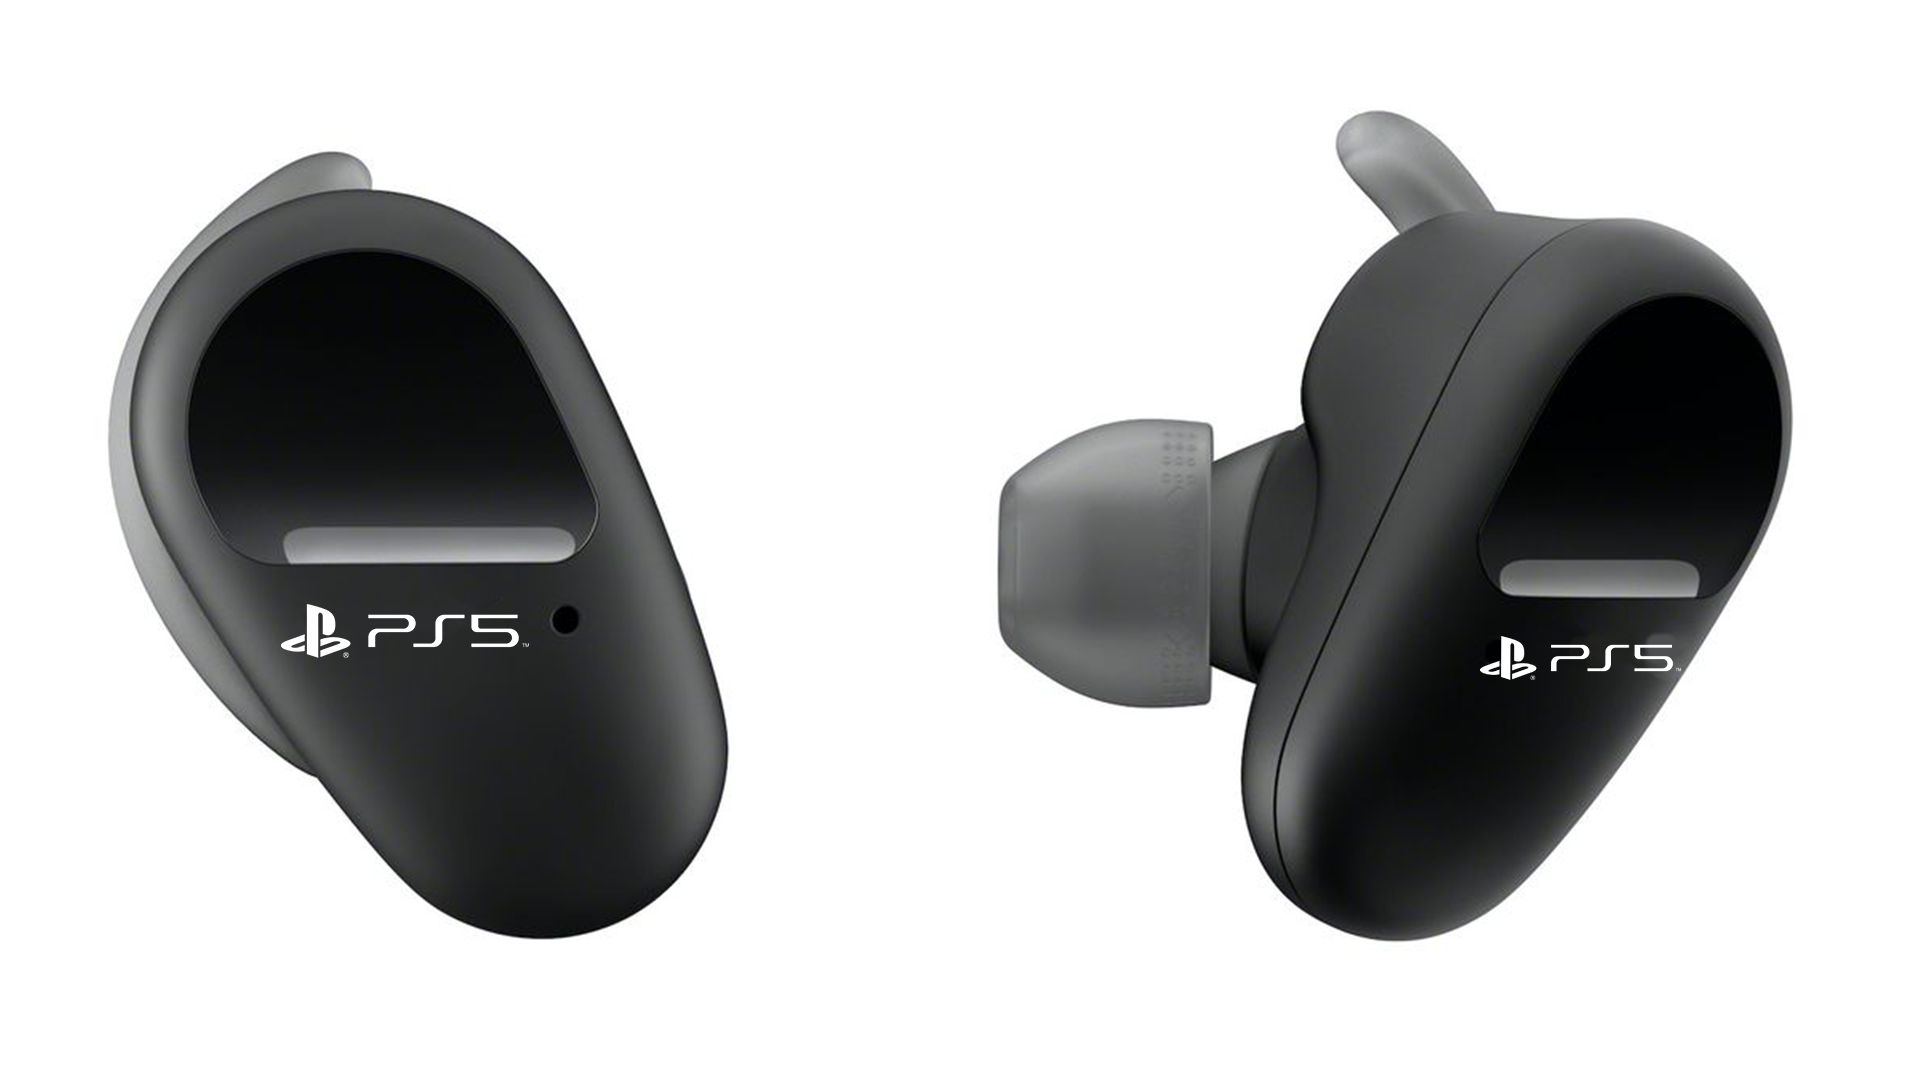 Exclusive - Sony is Developing Wireless Earbuds for The PS5